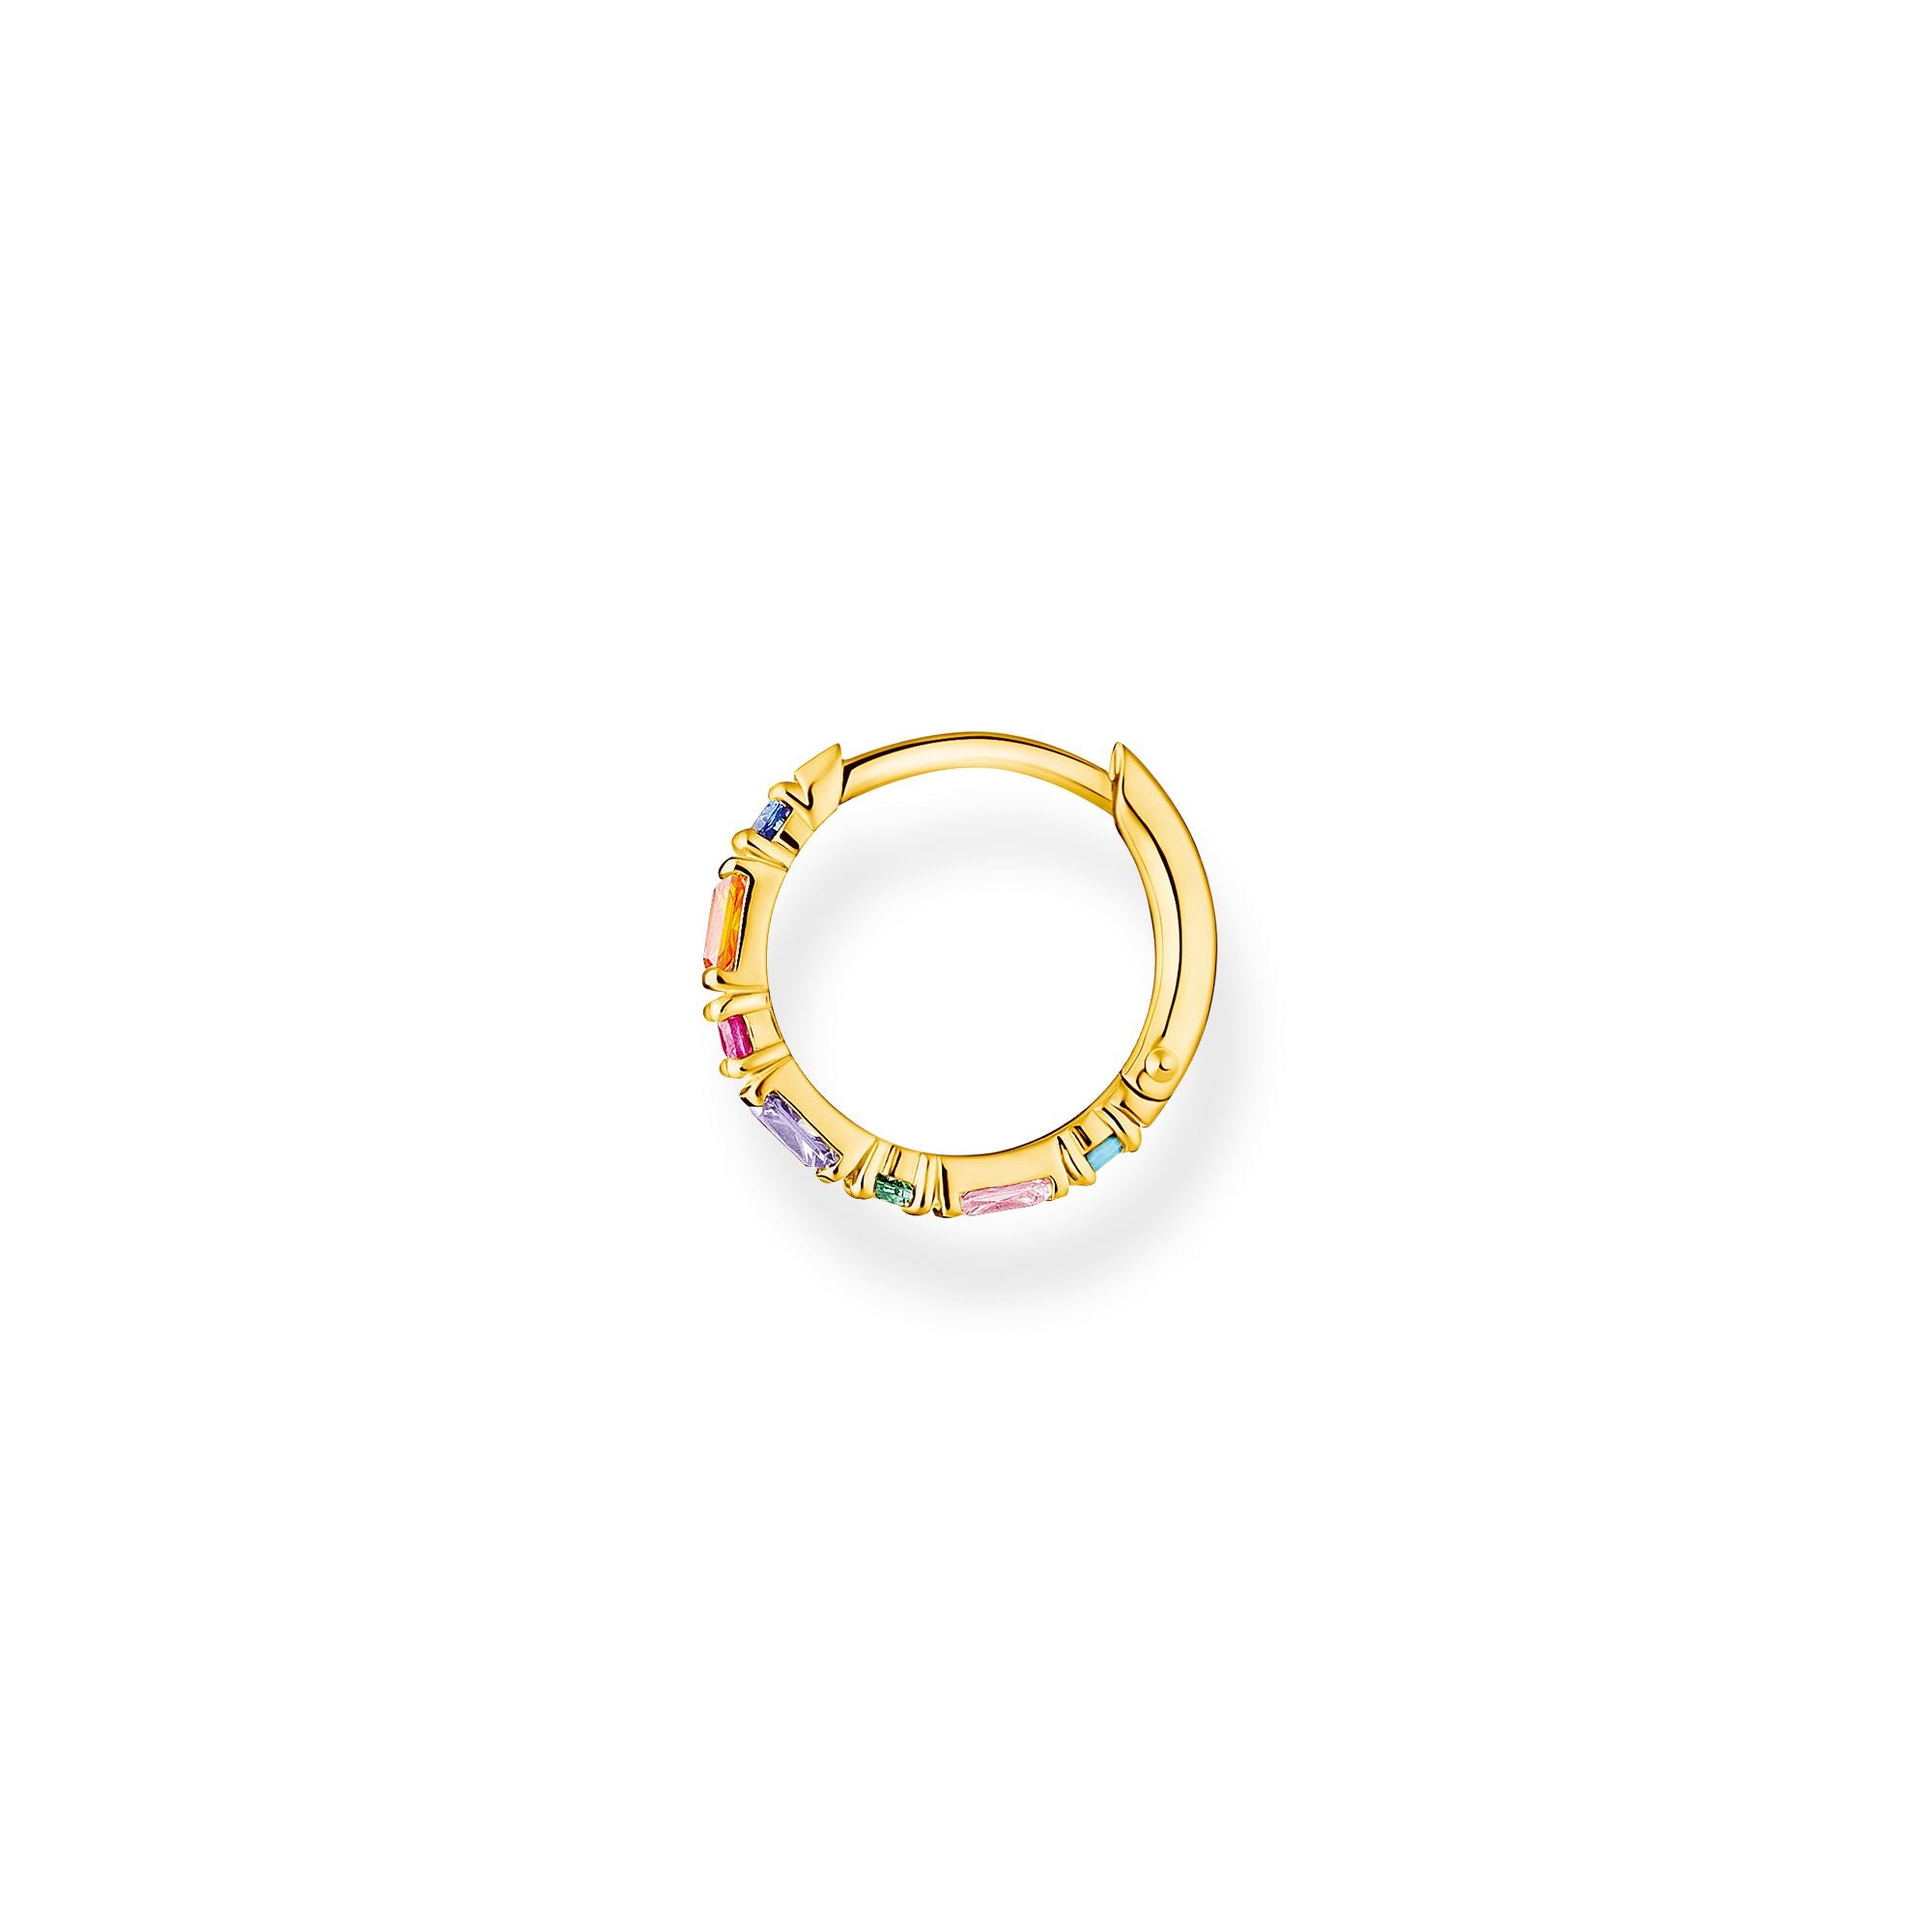 Thomas Sabo 18 karat yellow gold plated sterling silver, multi colour baguette gemstone, clicker style single earring